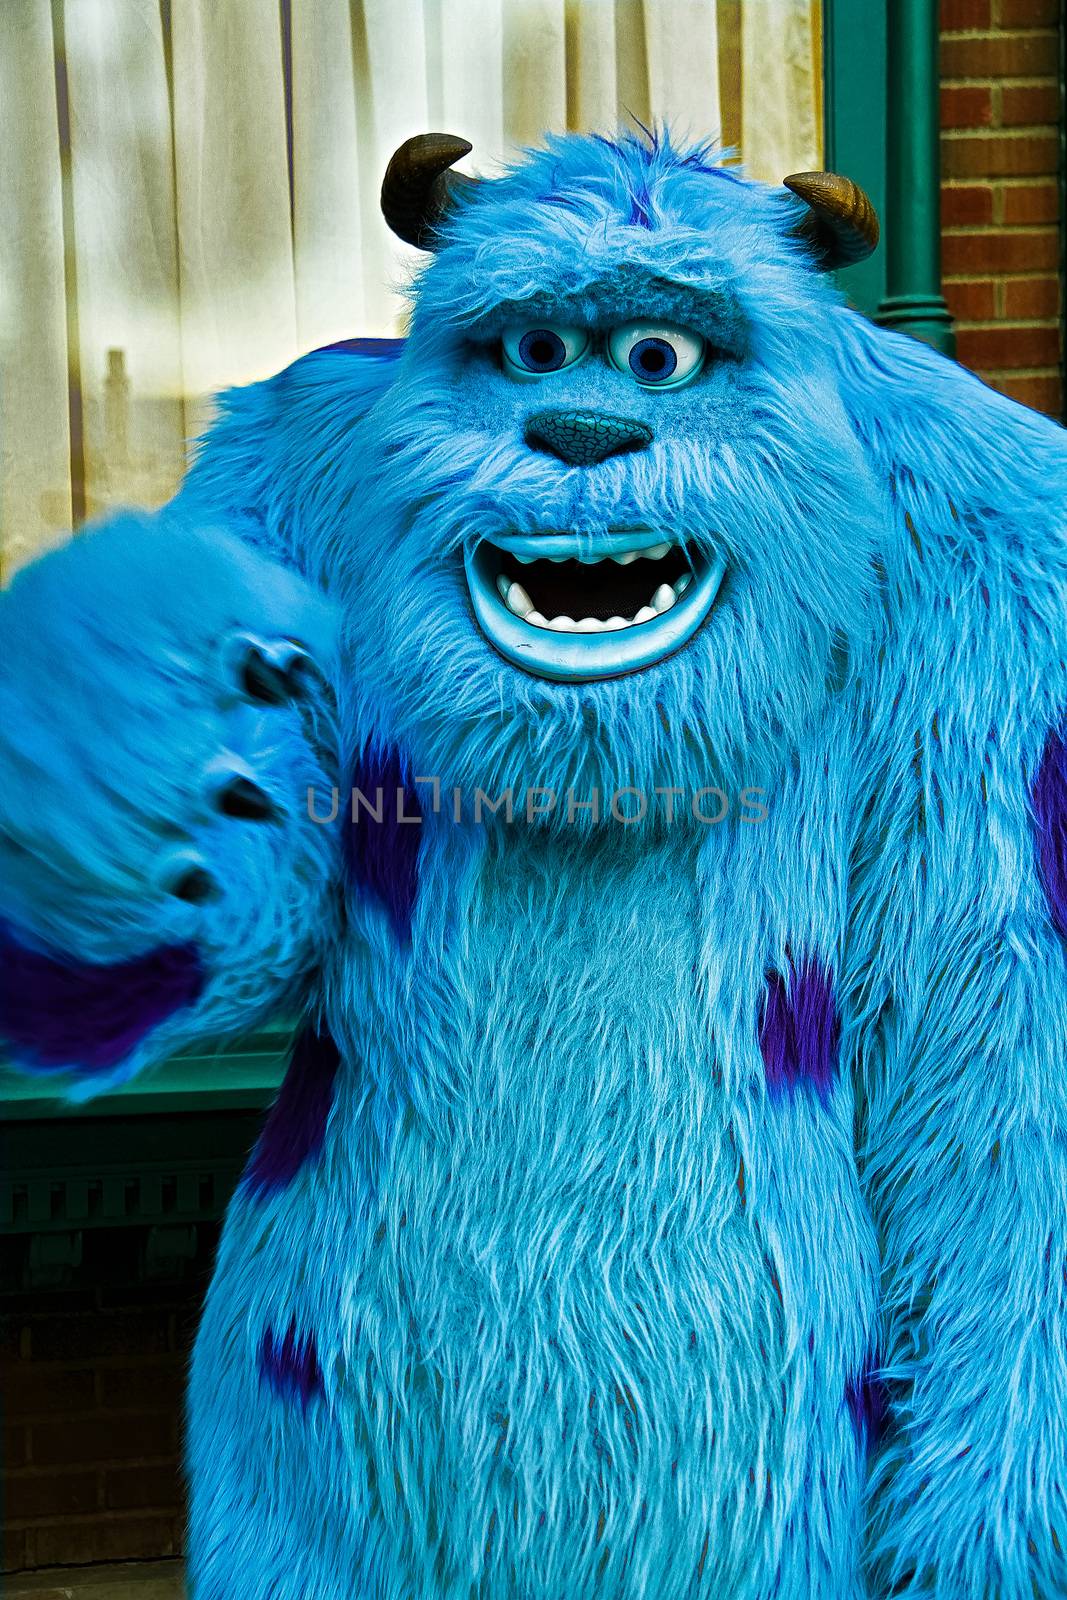 Anaheim,CA/USA - Nov 27, 2010 : A photo of James P. Sullivan, a monster character from Monster Inc at Disneyland in Anaheim.Disney Pixar animation. by USA-TARO